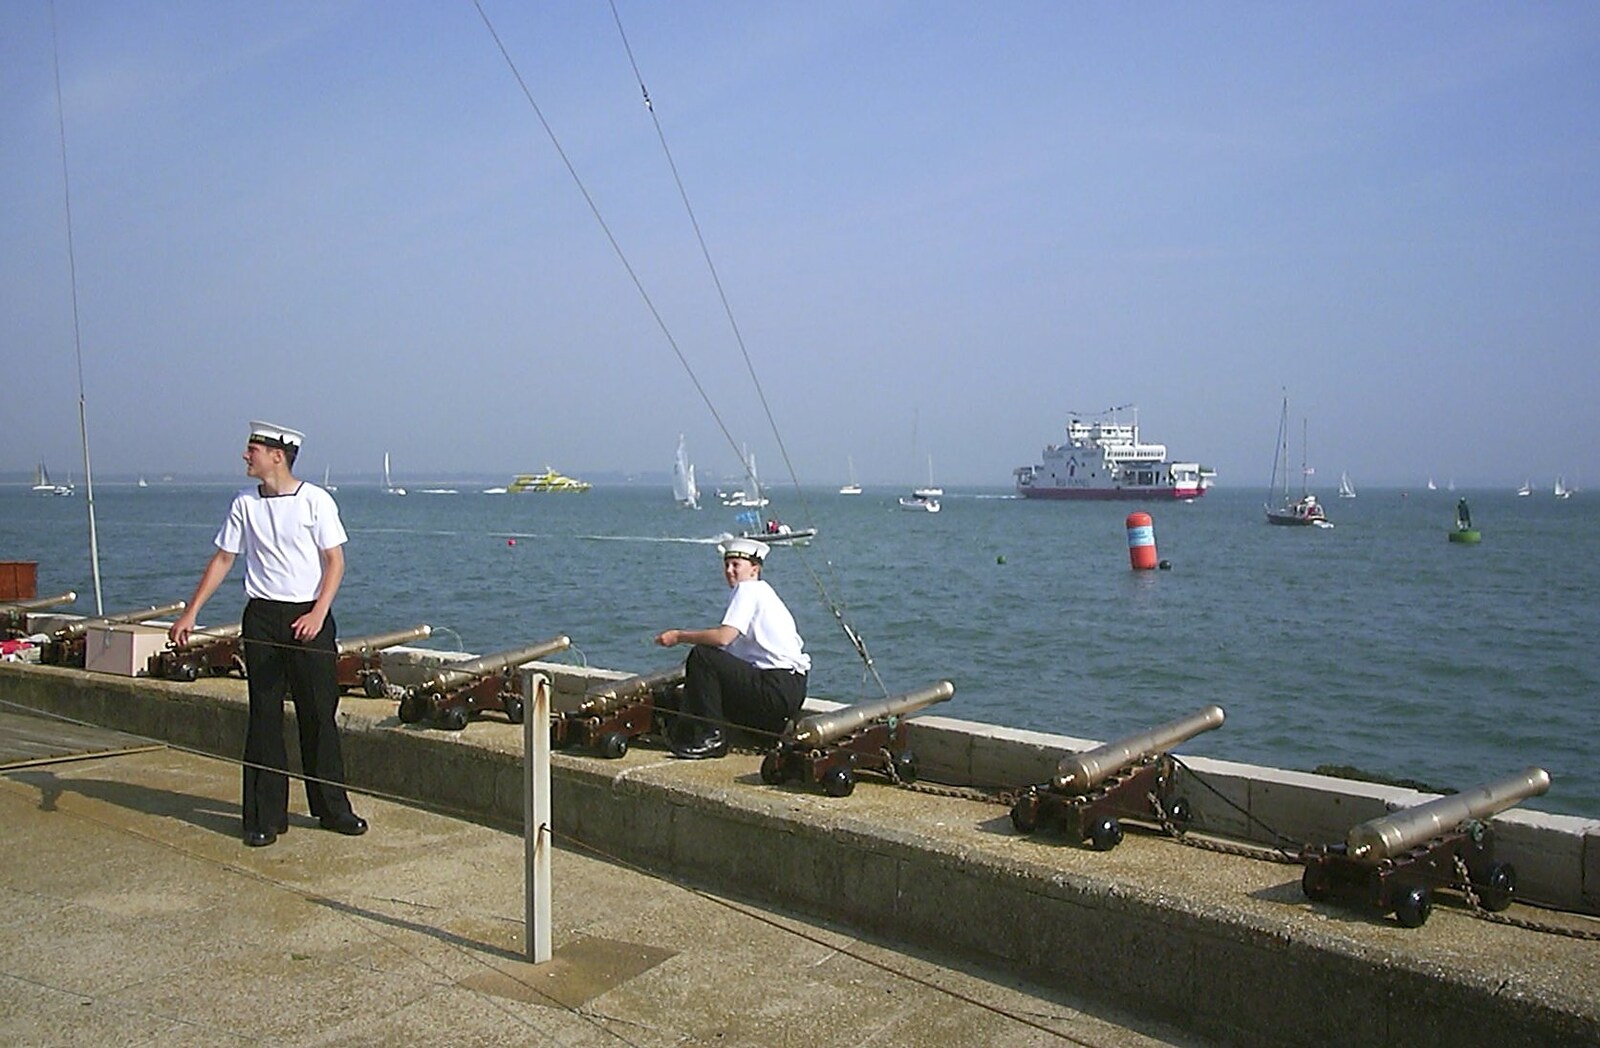 Starting guns are prepared for the day from Cowes Weekend, Cowes, Isle of Wight - 7th August 2004